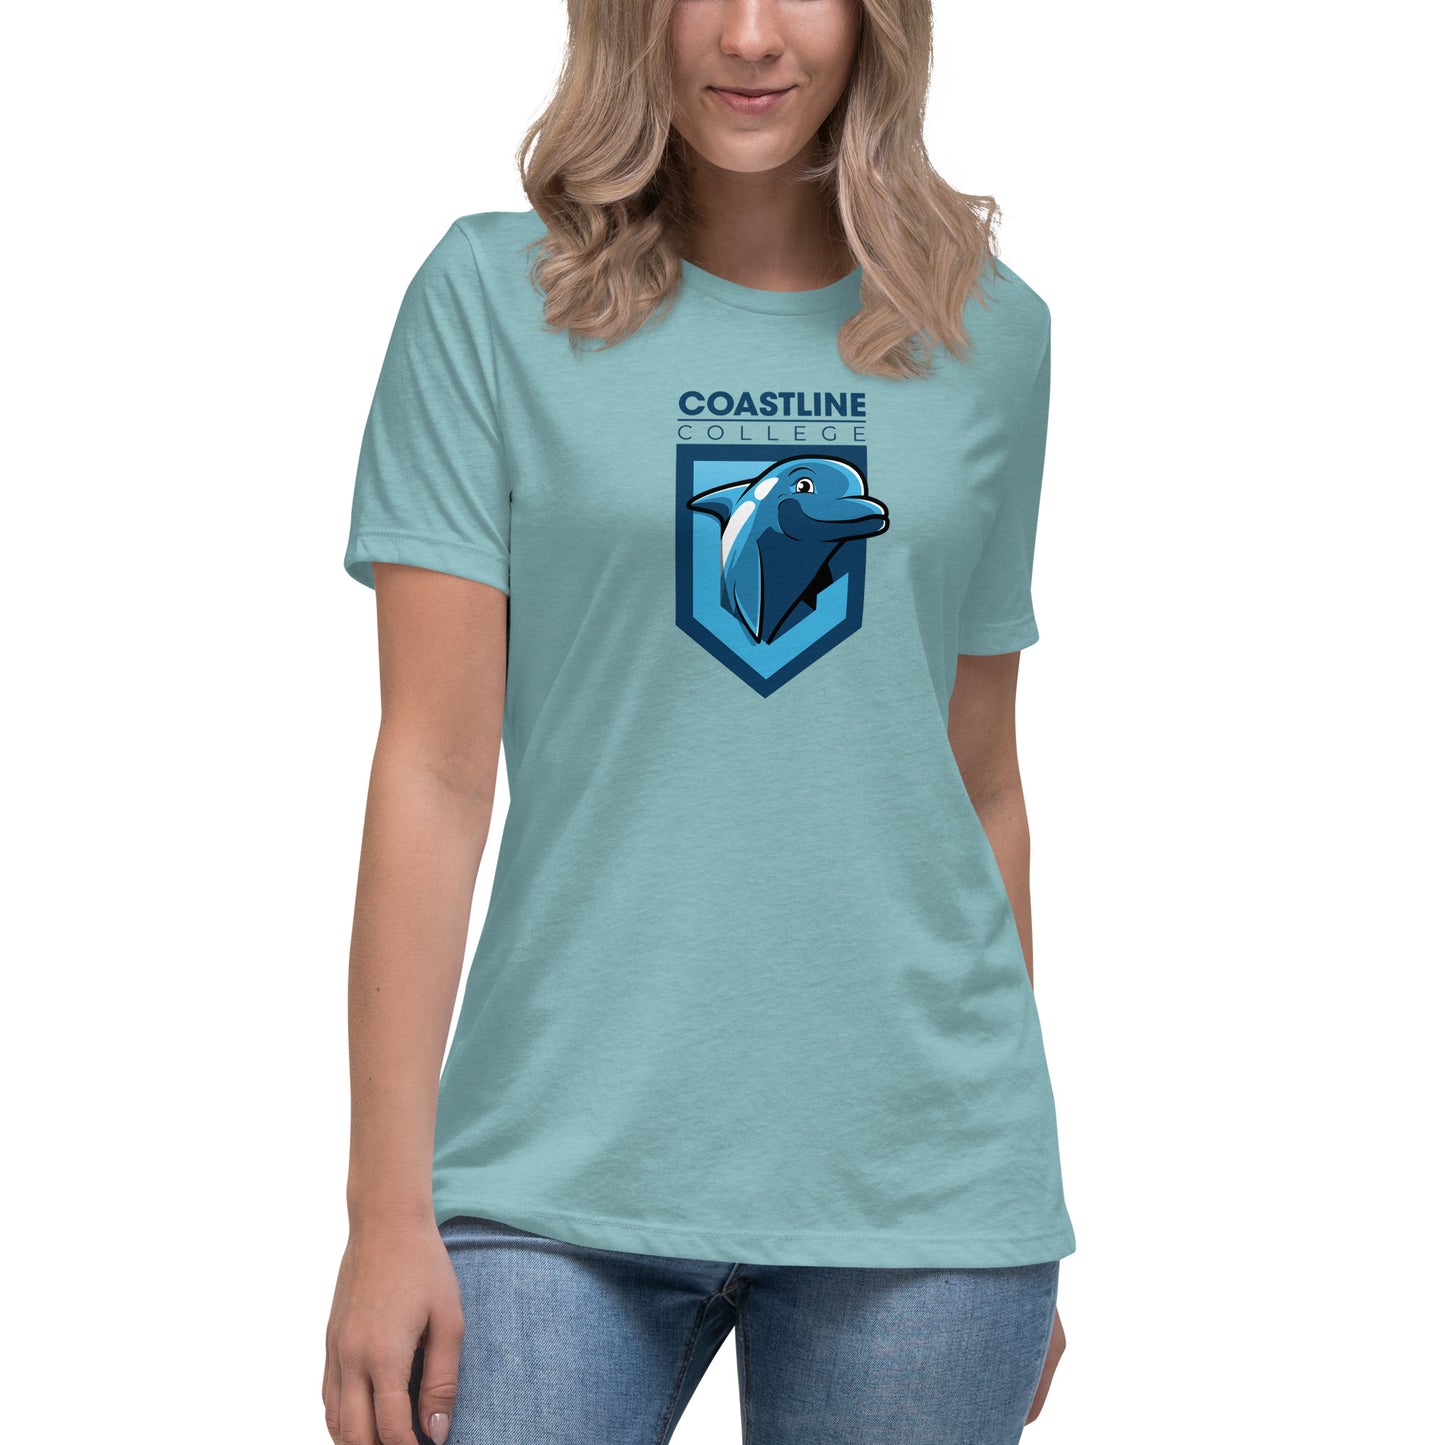 Fin Collection Women's Relaxed T-Shirt - Light Colors